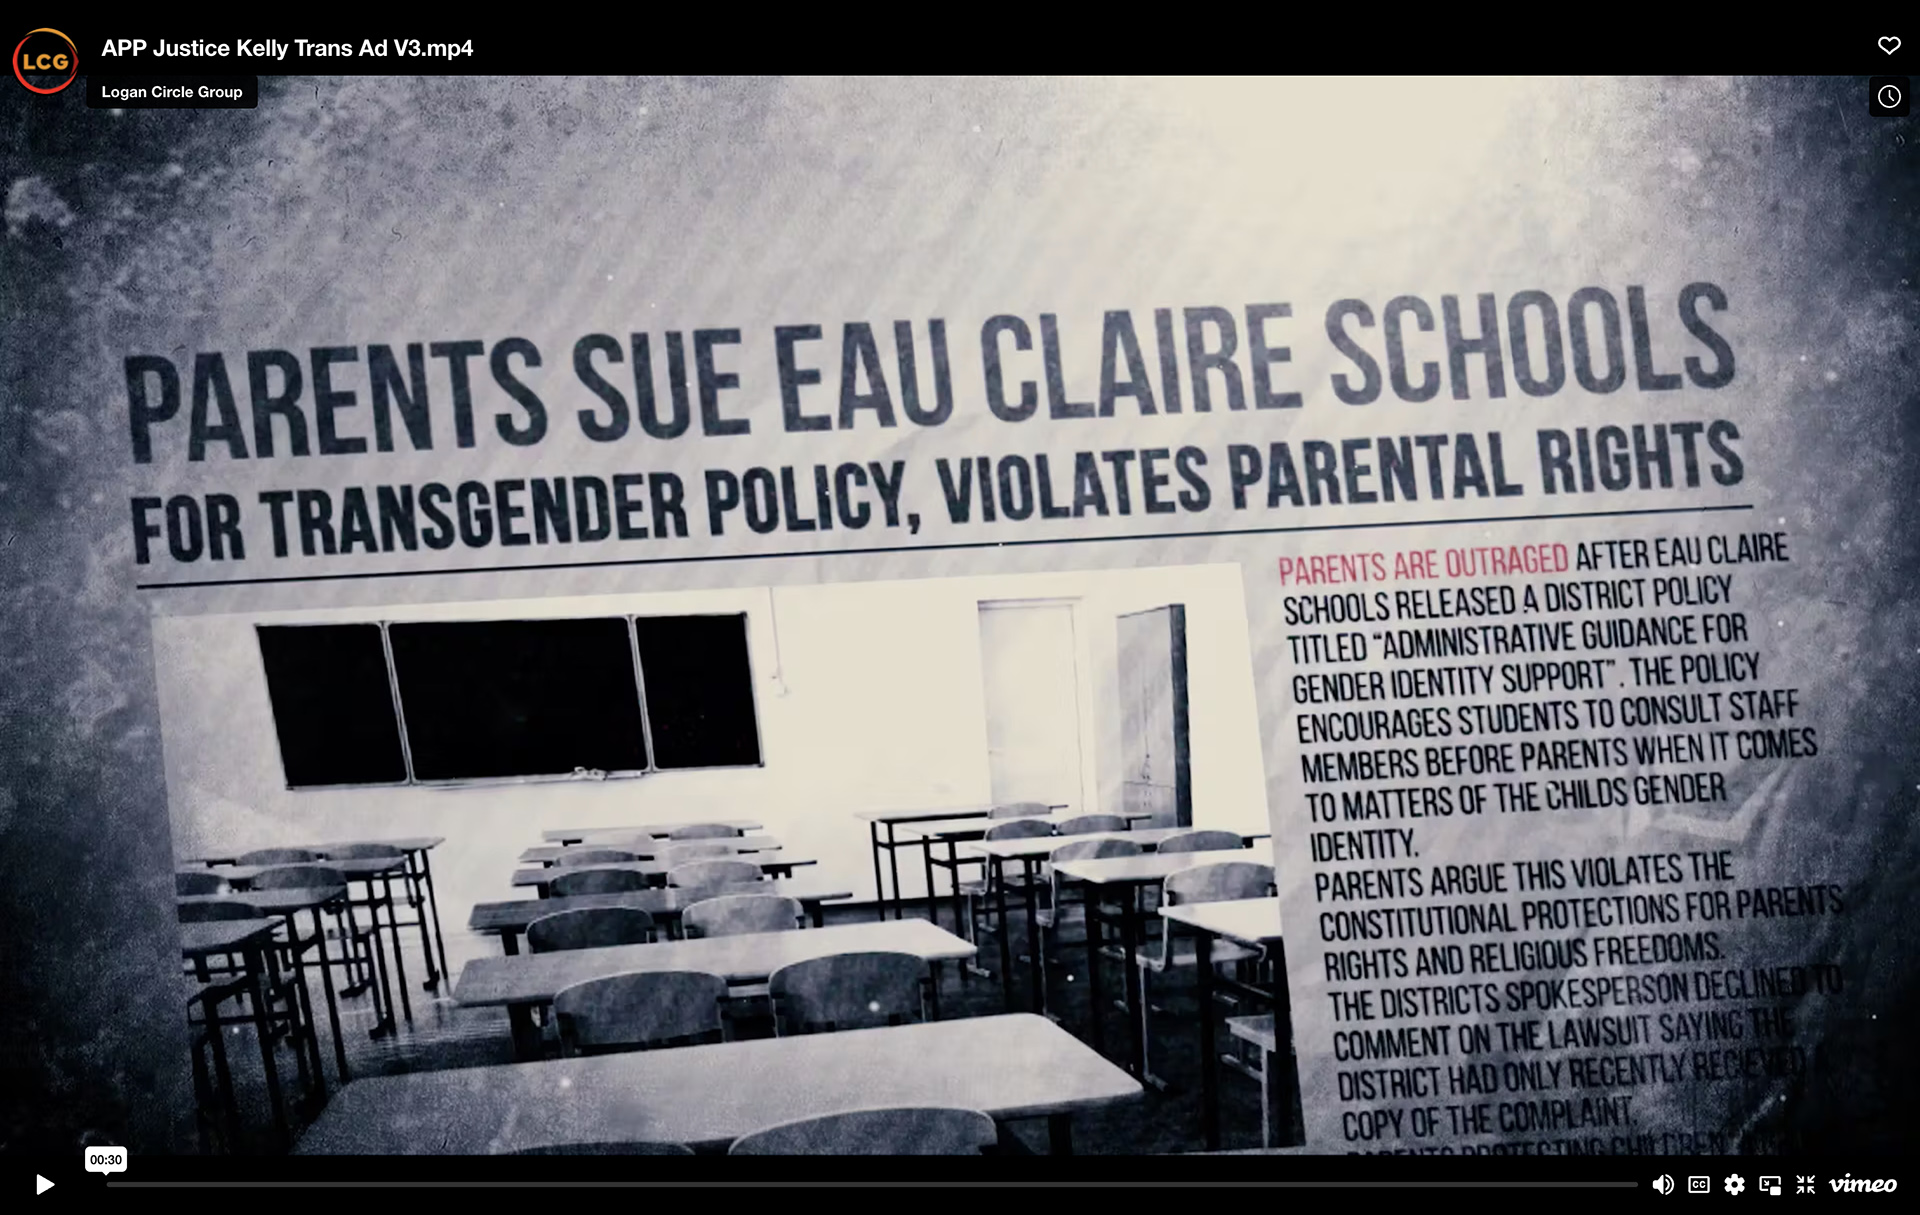 A still image from a video shows an illustration with a photo of a classroom and header text that reads "Parents Sue Eau Claire Schools for Transgender Policy, Violates Parental Rights."